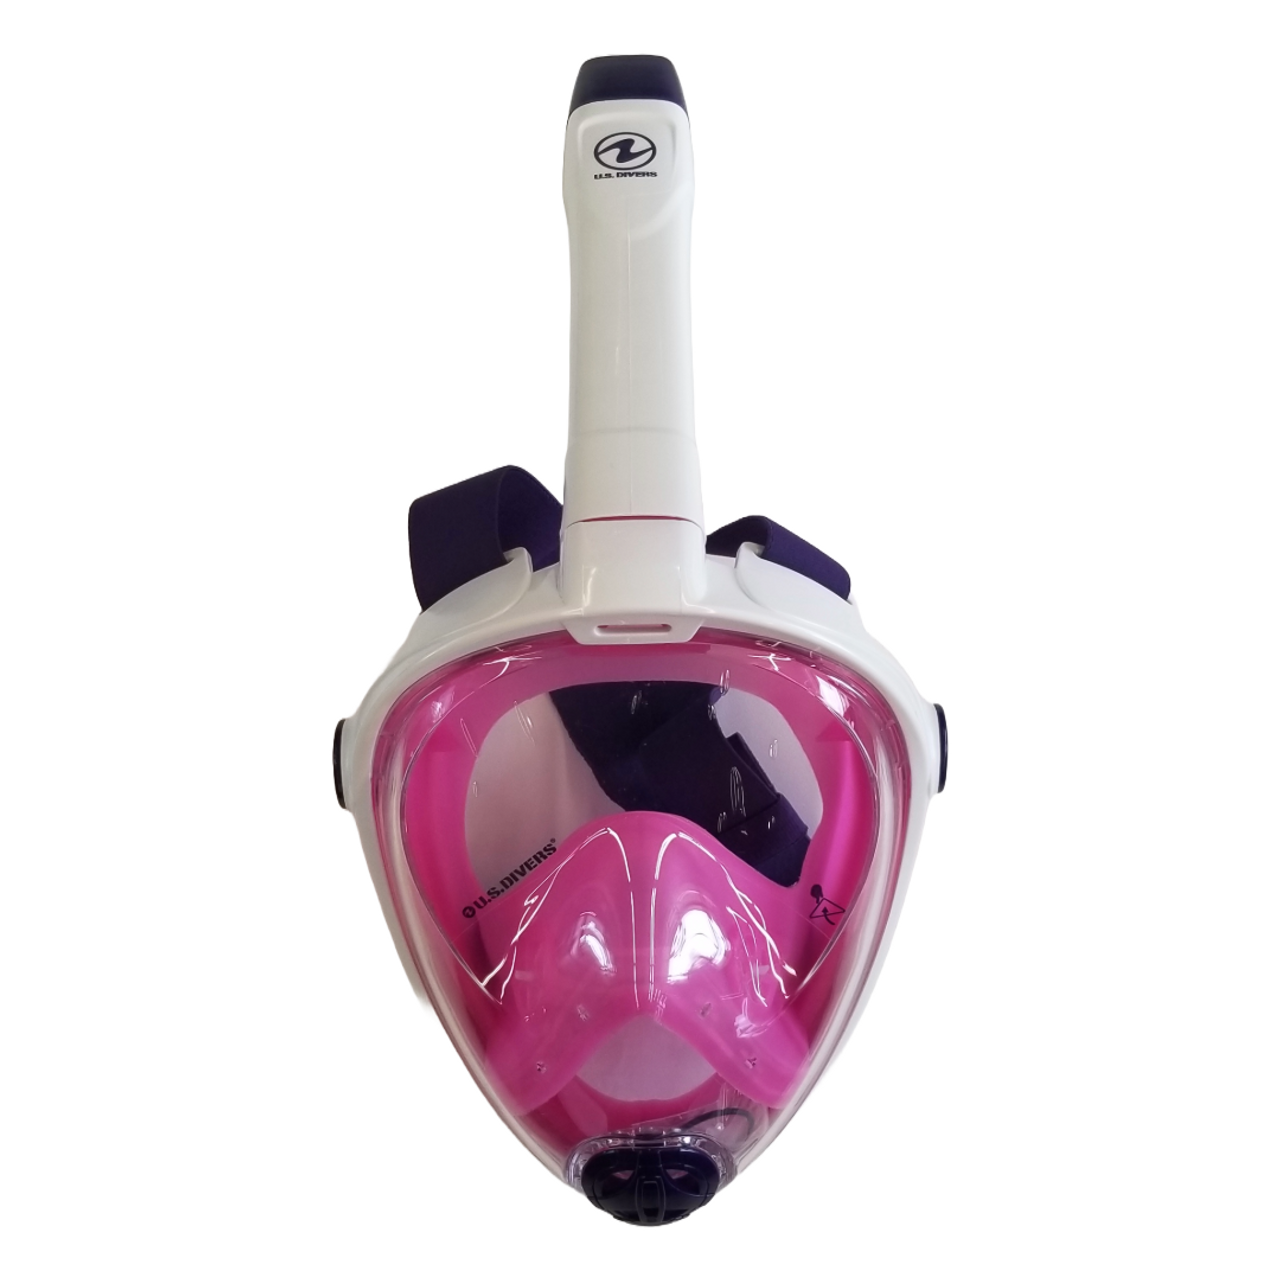 U.S. Divers Hydroair Full Face Mask Snorkel System - Pink/White